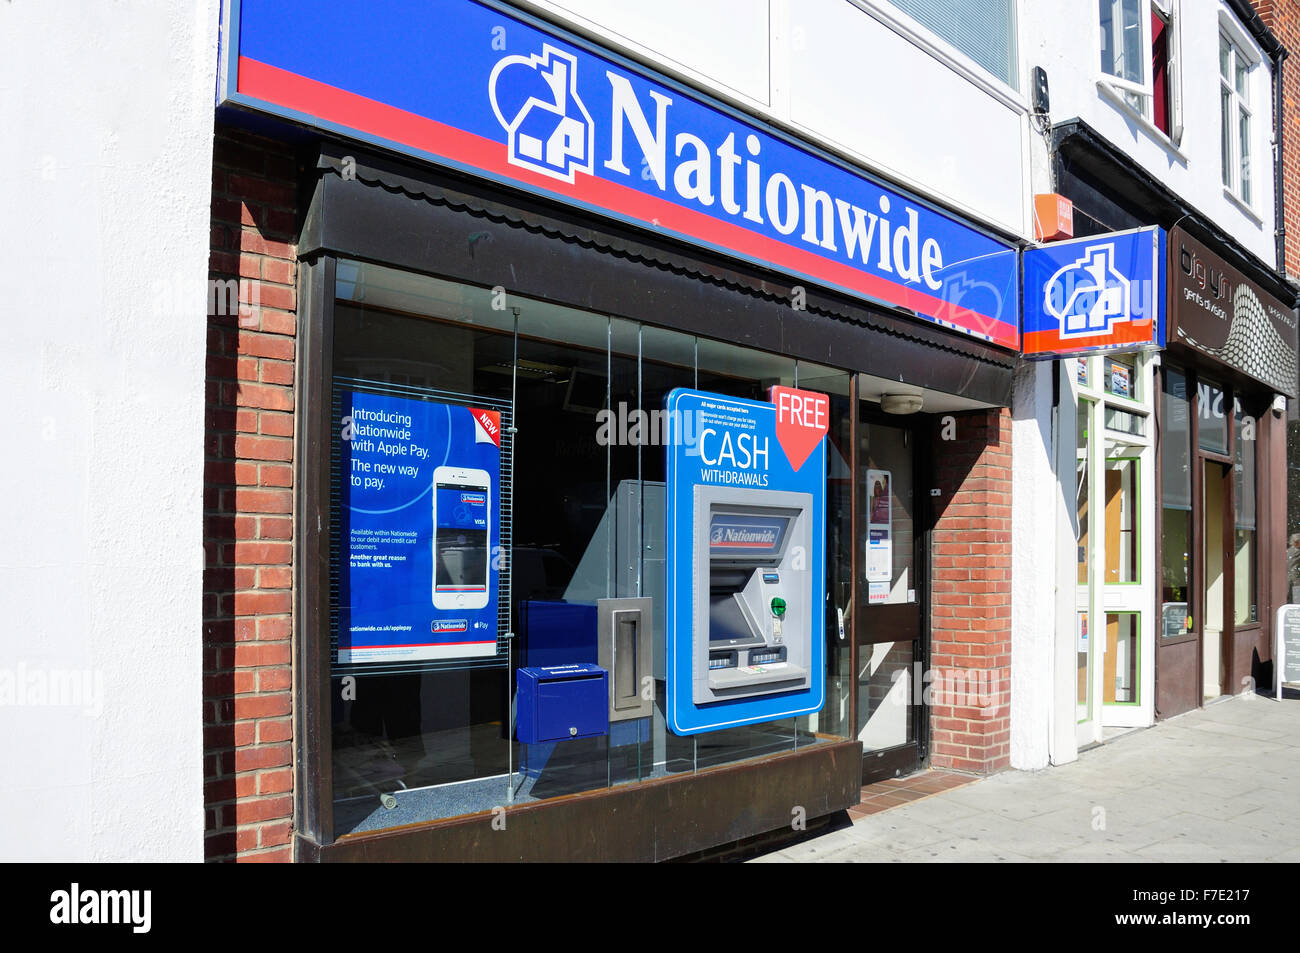 Banque nationale, High Street, Rayleigh, Essex, Angleterre, Royaume-Uni Banque D'Images